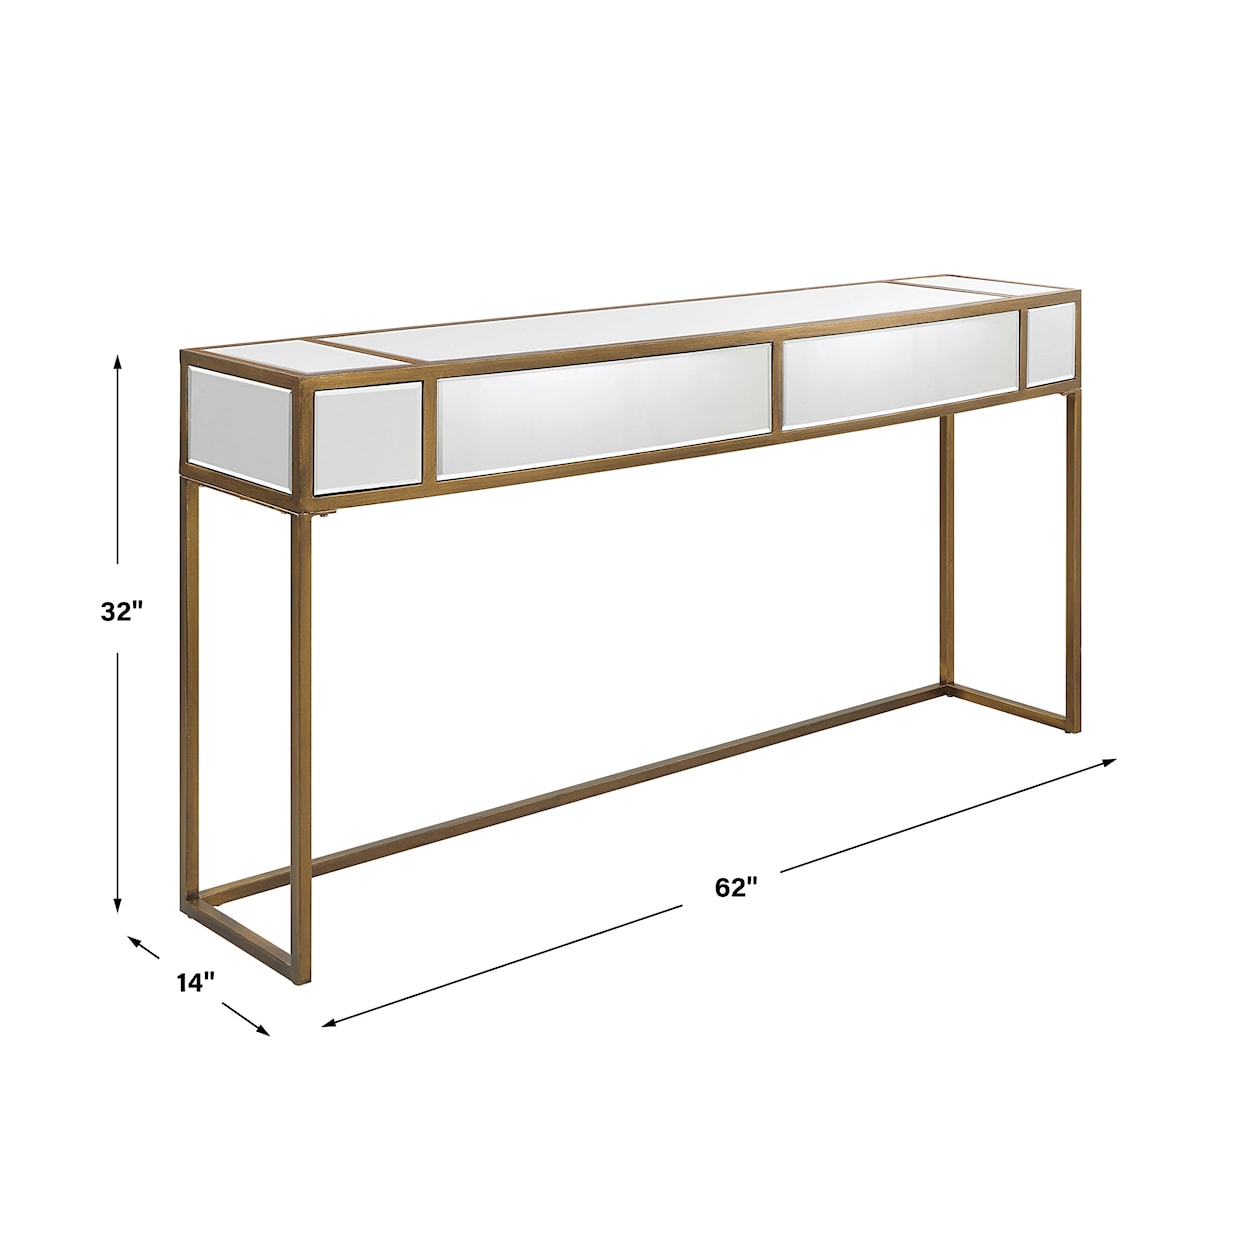 Uttermost Reflect Reflect Mirrored Console Table